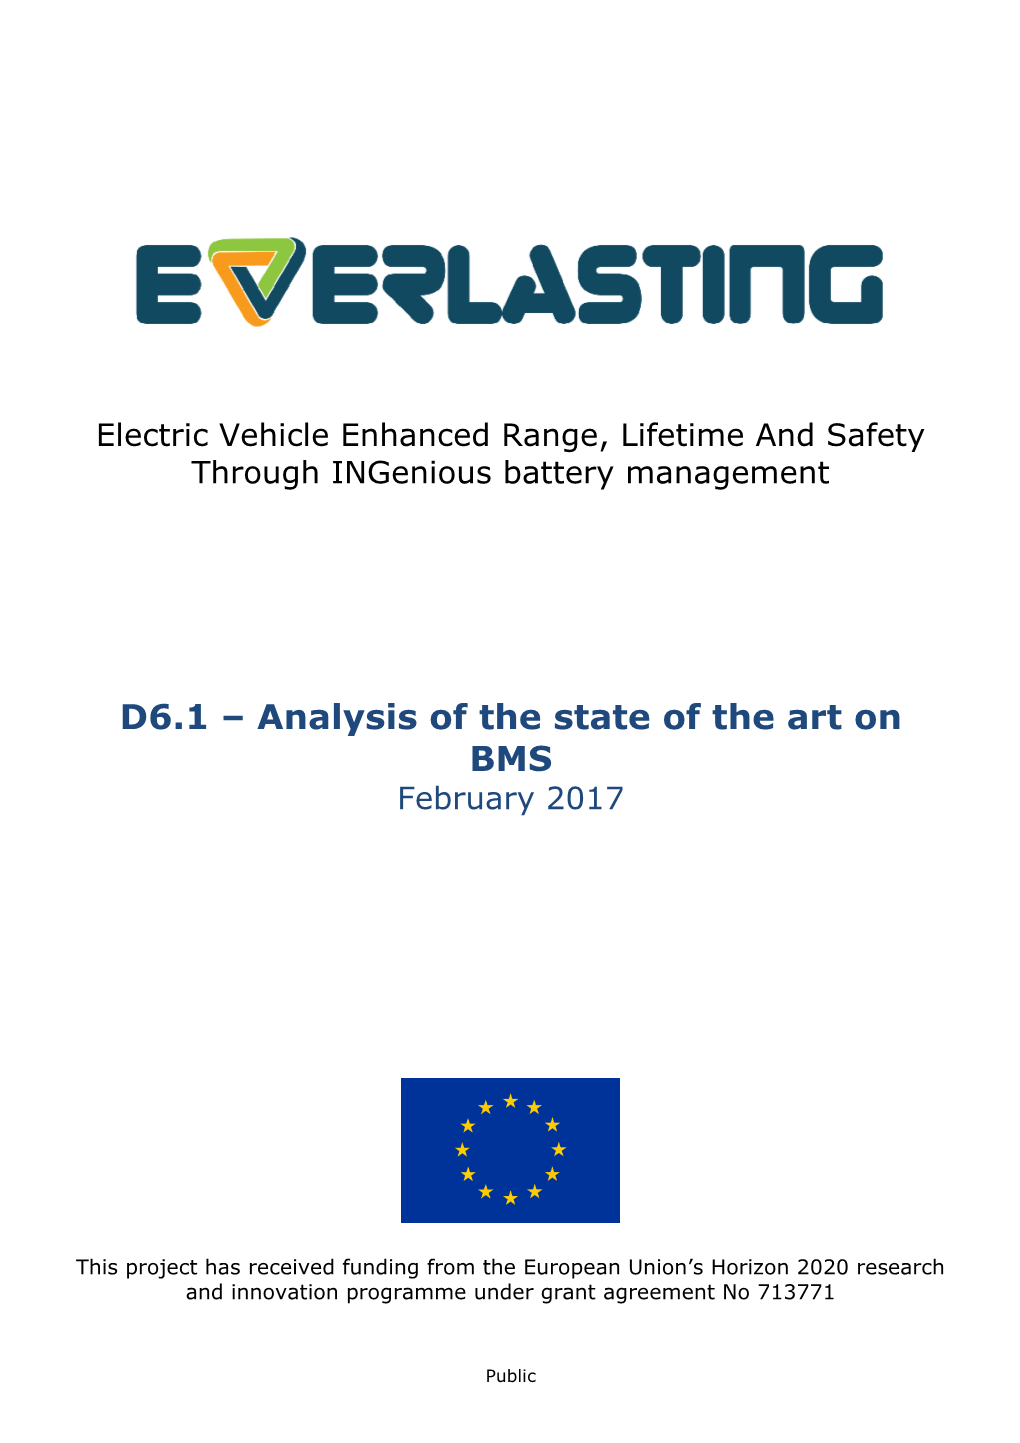 D6.1 – Analysis of the State of the Art on BMS February 2017